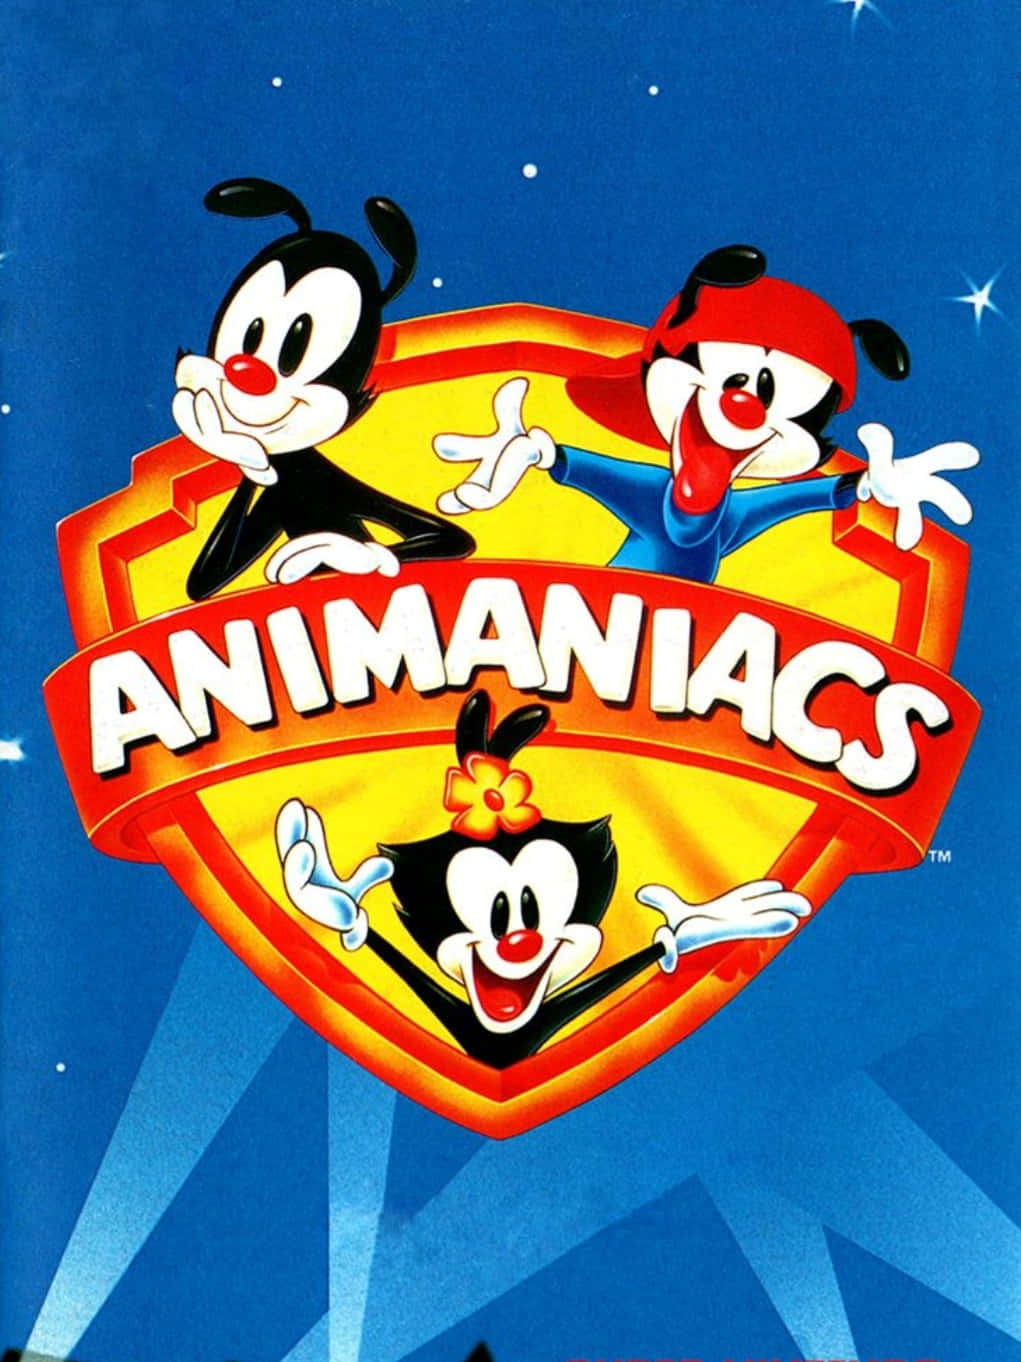 The Animaniacs cast of Wakko, Yakko, and Dot bringing the humour in their unique way!